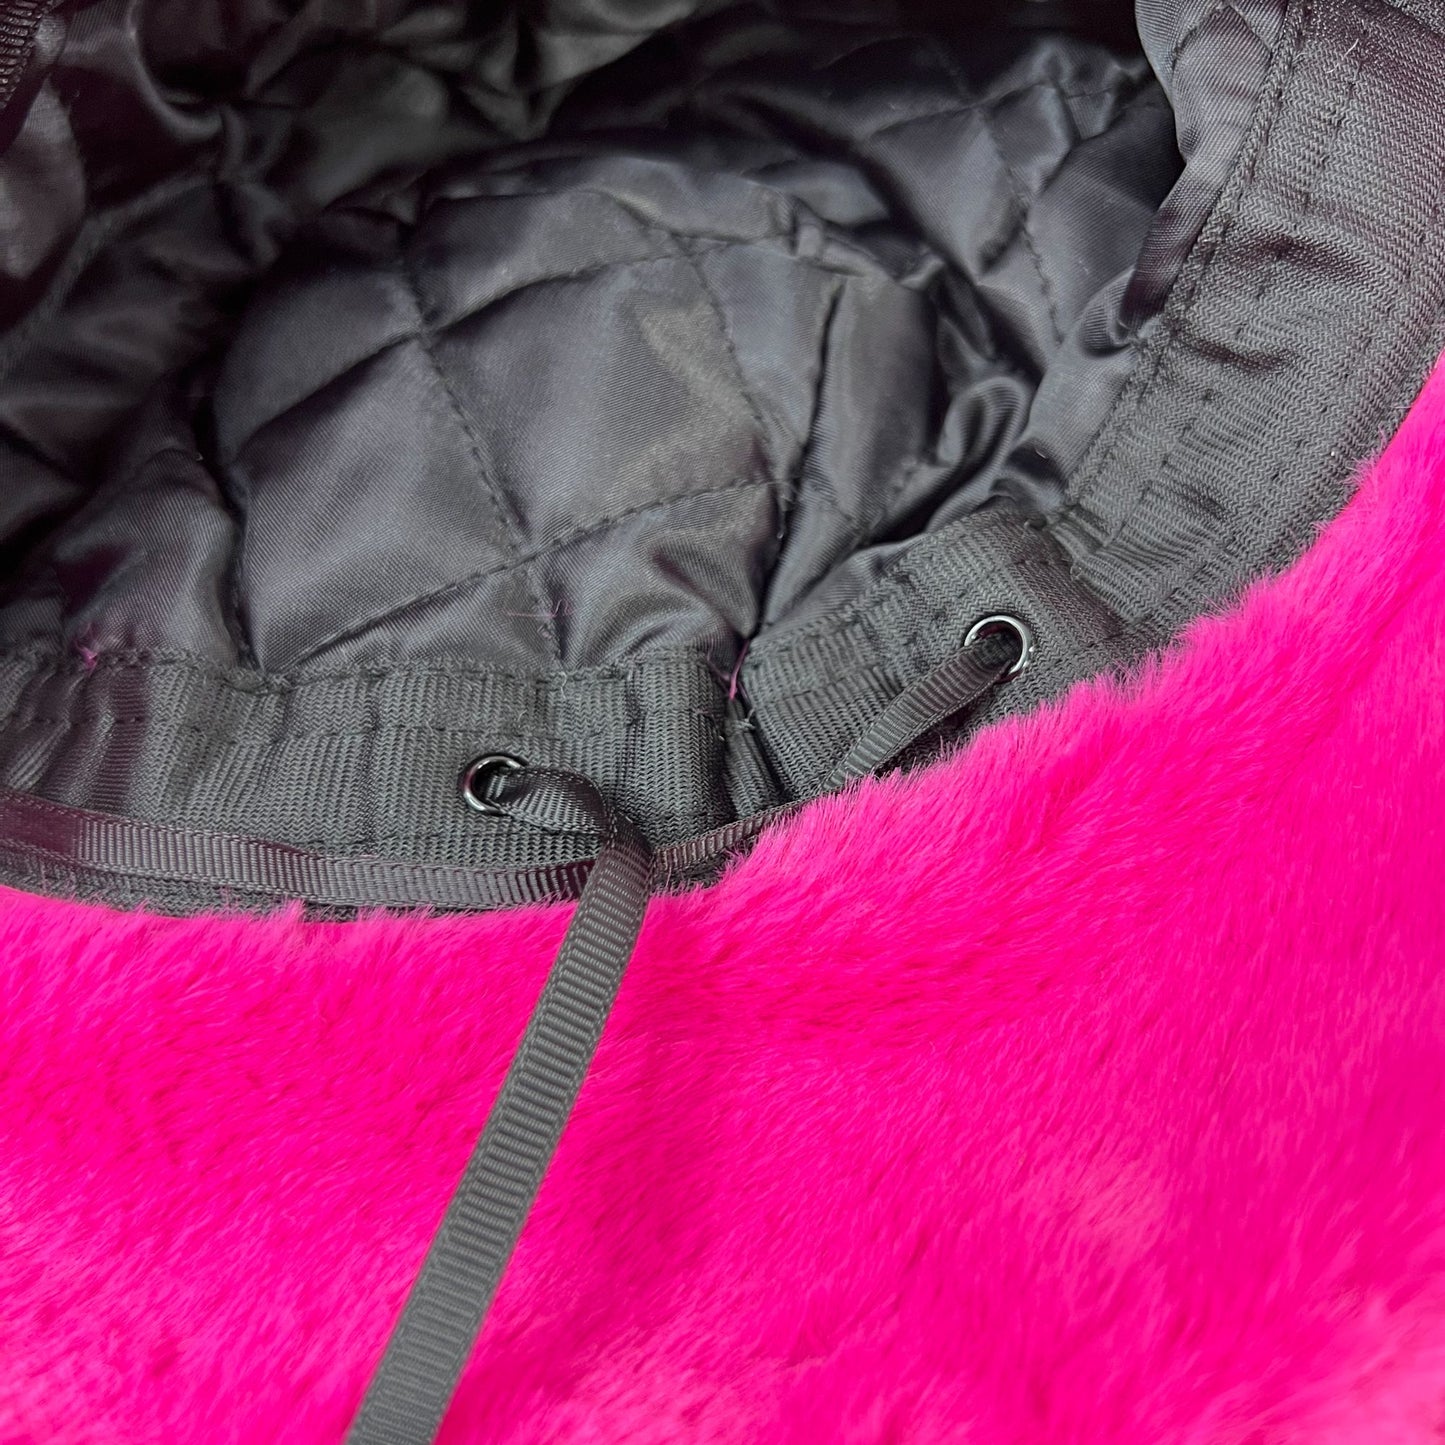 Sassy "That's Hot" Pink Furry Festival Bucket Hat – a vibrant accessory for making a bold fashion statement at any event! Displayed on a table. Drawstring view.